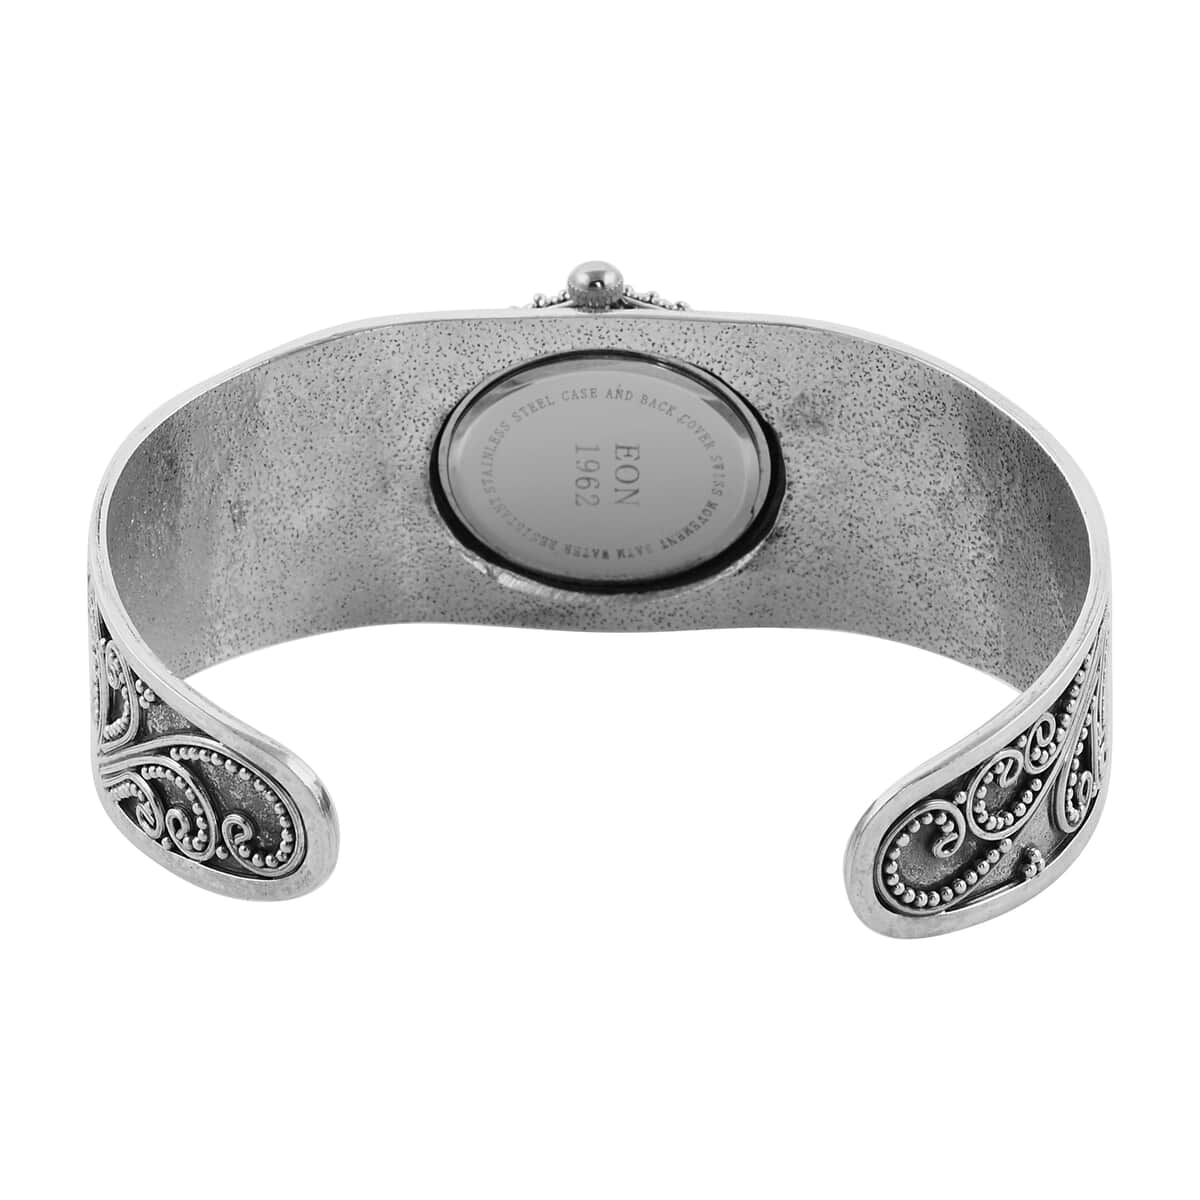 Bali Legacy Eon 1962 Swiss Movement Cuff Bracelet Watch with MOP Dial in Sterling Silver (7.50 In) image number 4